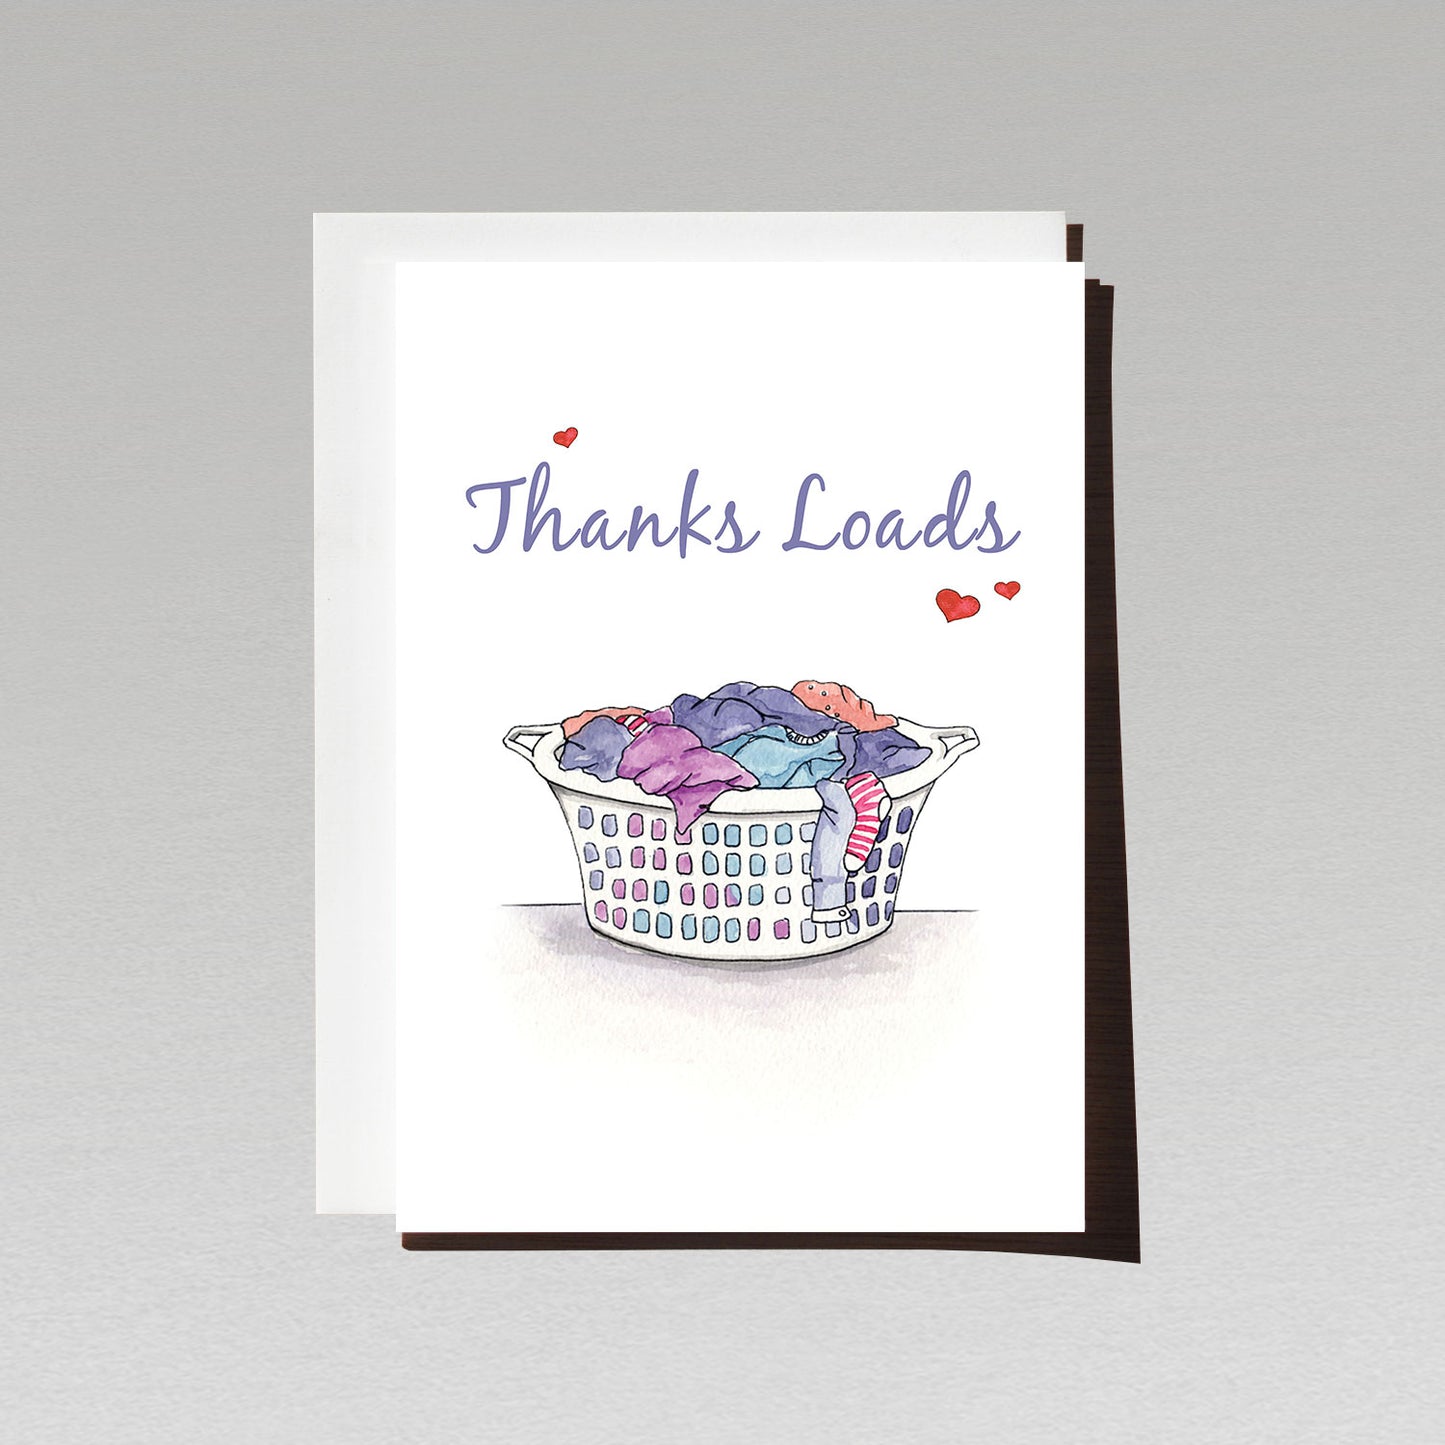 Greeting card with illustration of a full laundry basket on white background with blue text Thanks loads